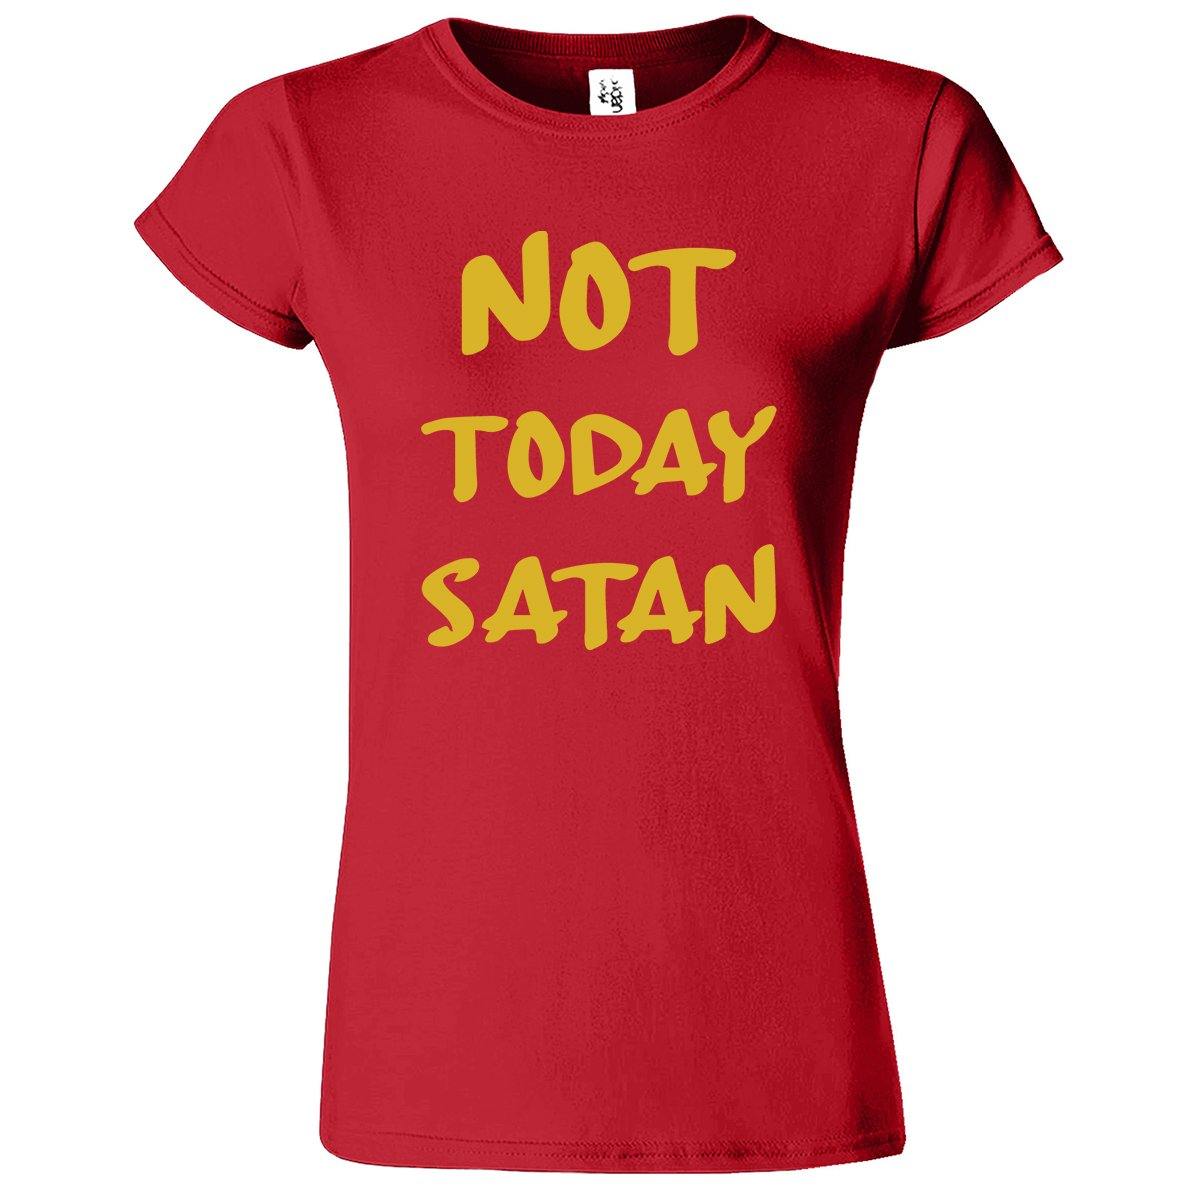 Not Today Satan Printed T-Shirt for Women's - ApparelinClick